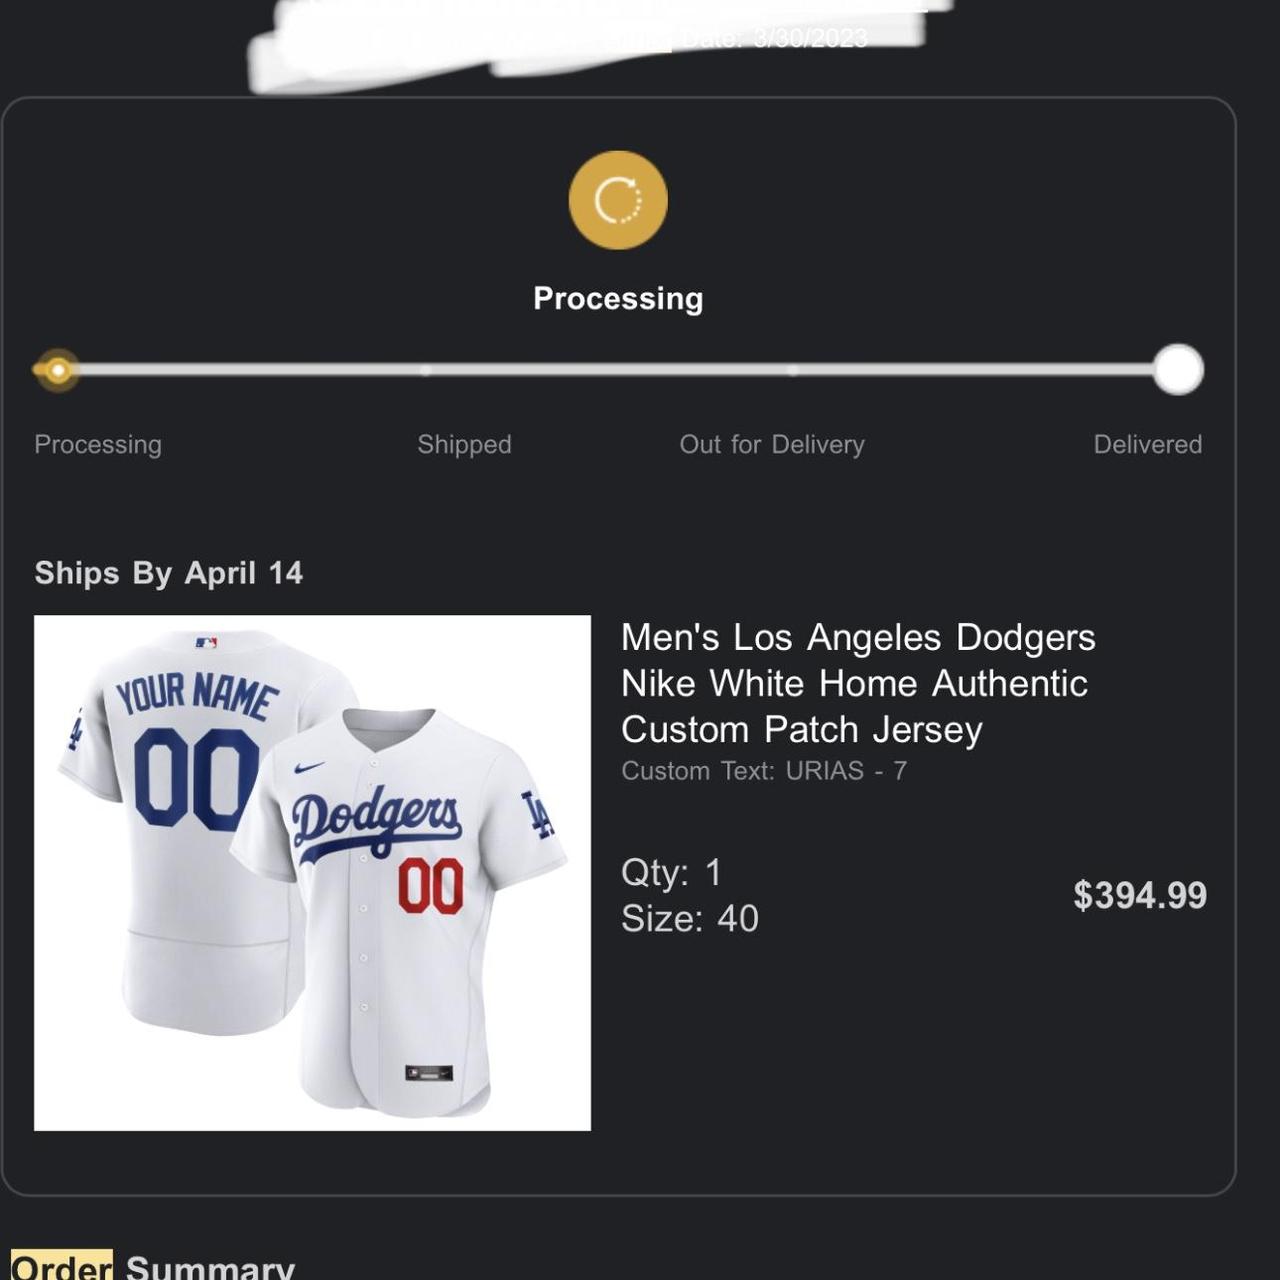 Men's Los Angeles Dodgers Nike White Home Authentic Custom Patch Jersey